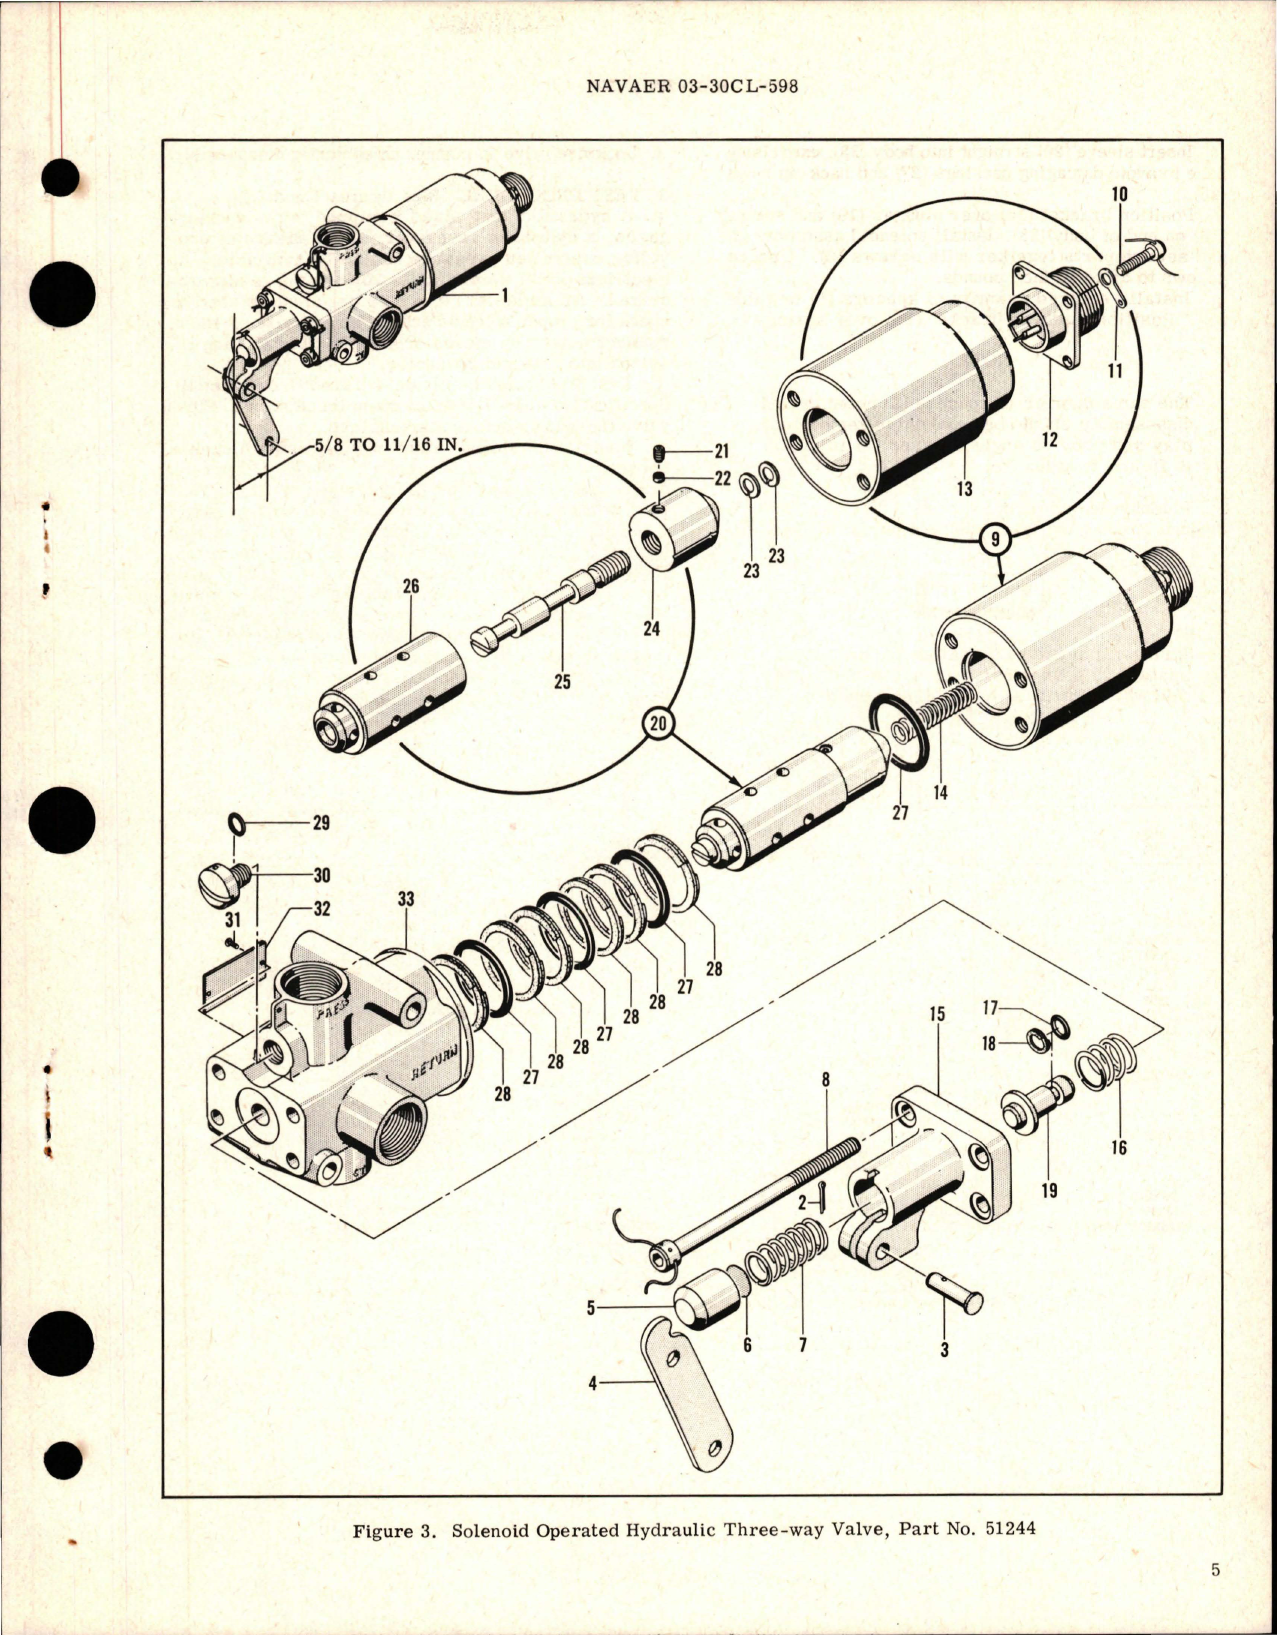 Sample page 5 from AirCorps Library document: Overhaul Instructions with Parts for Solenoid Operated Hydraulic Three-Way Valve - Part 51244 